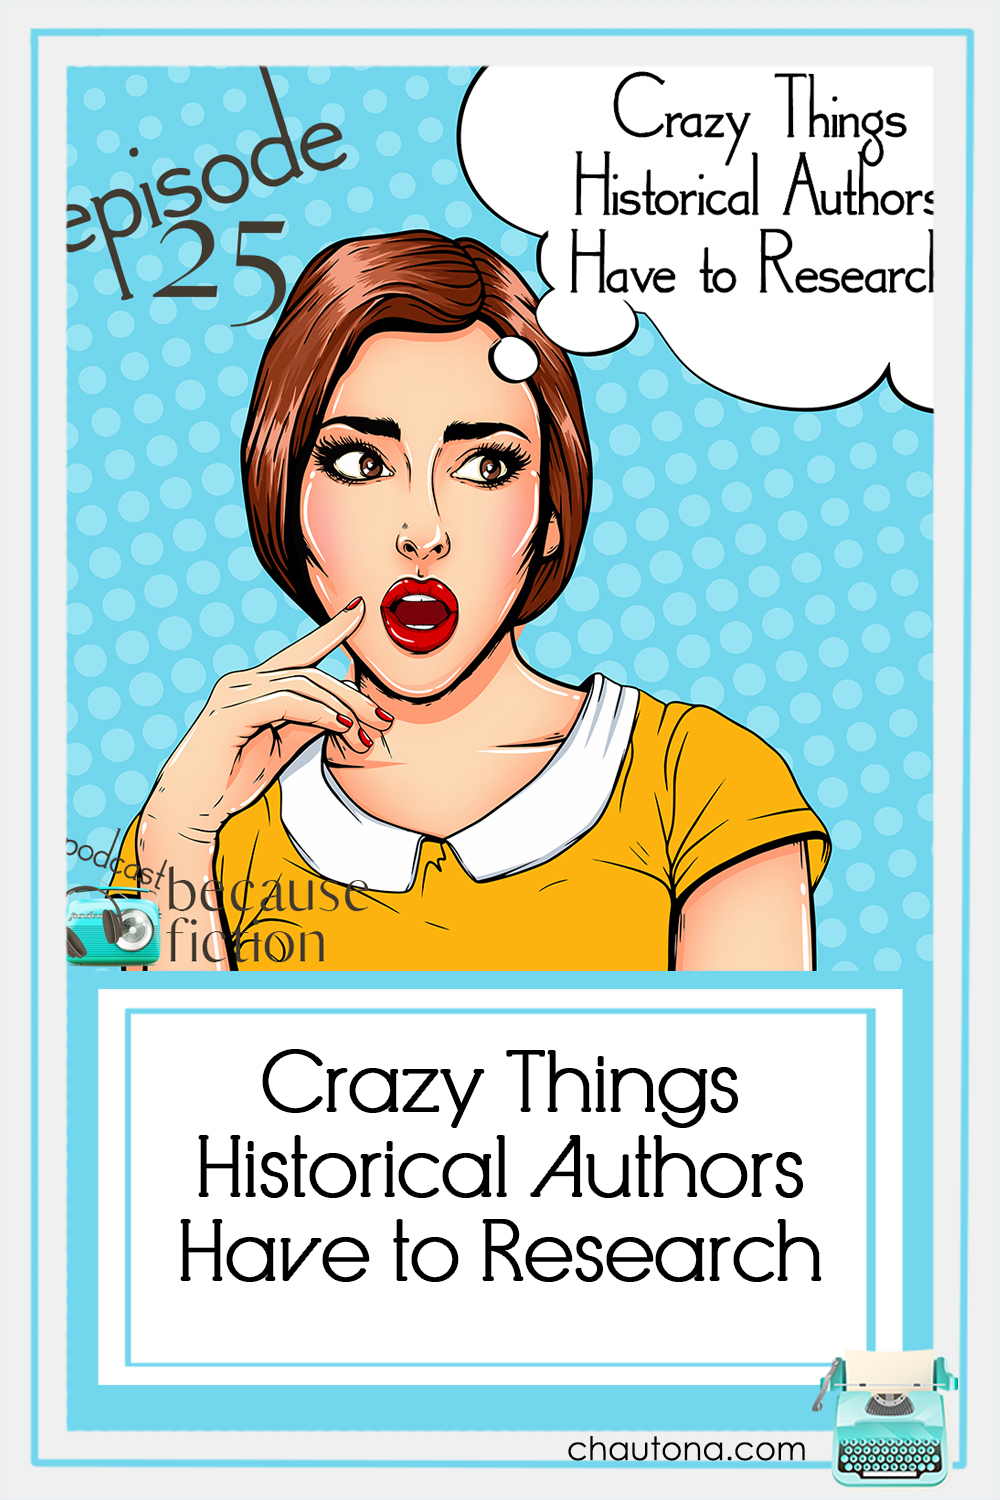 Crazy Things Historical Authors Have to Research